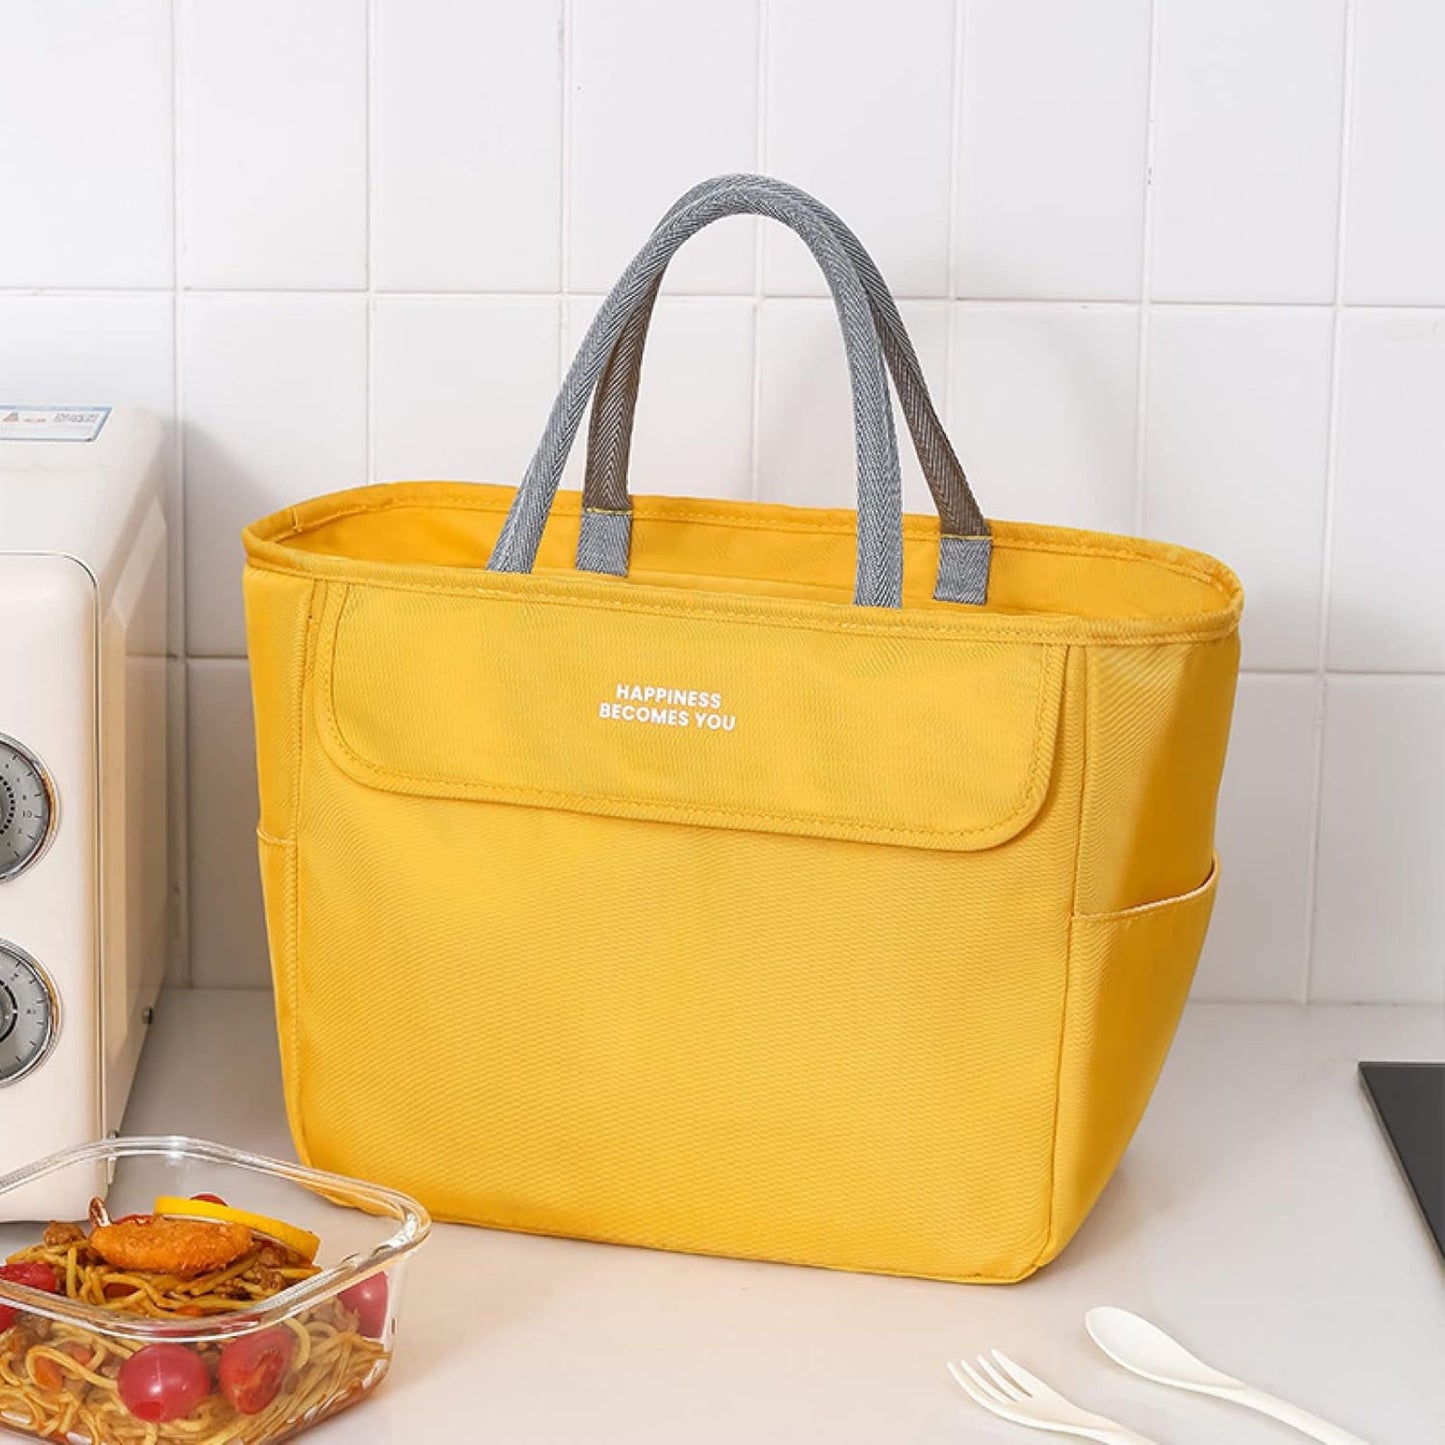 Happiness Insulated Lunch Tote Bag